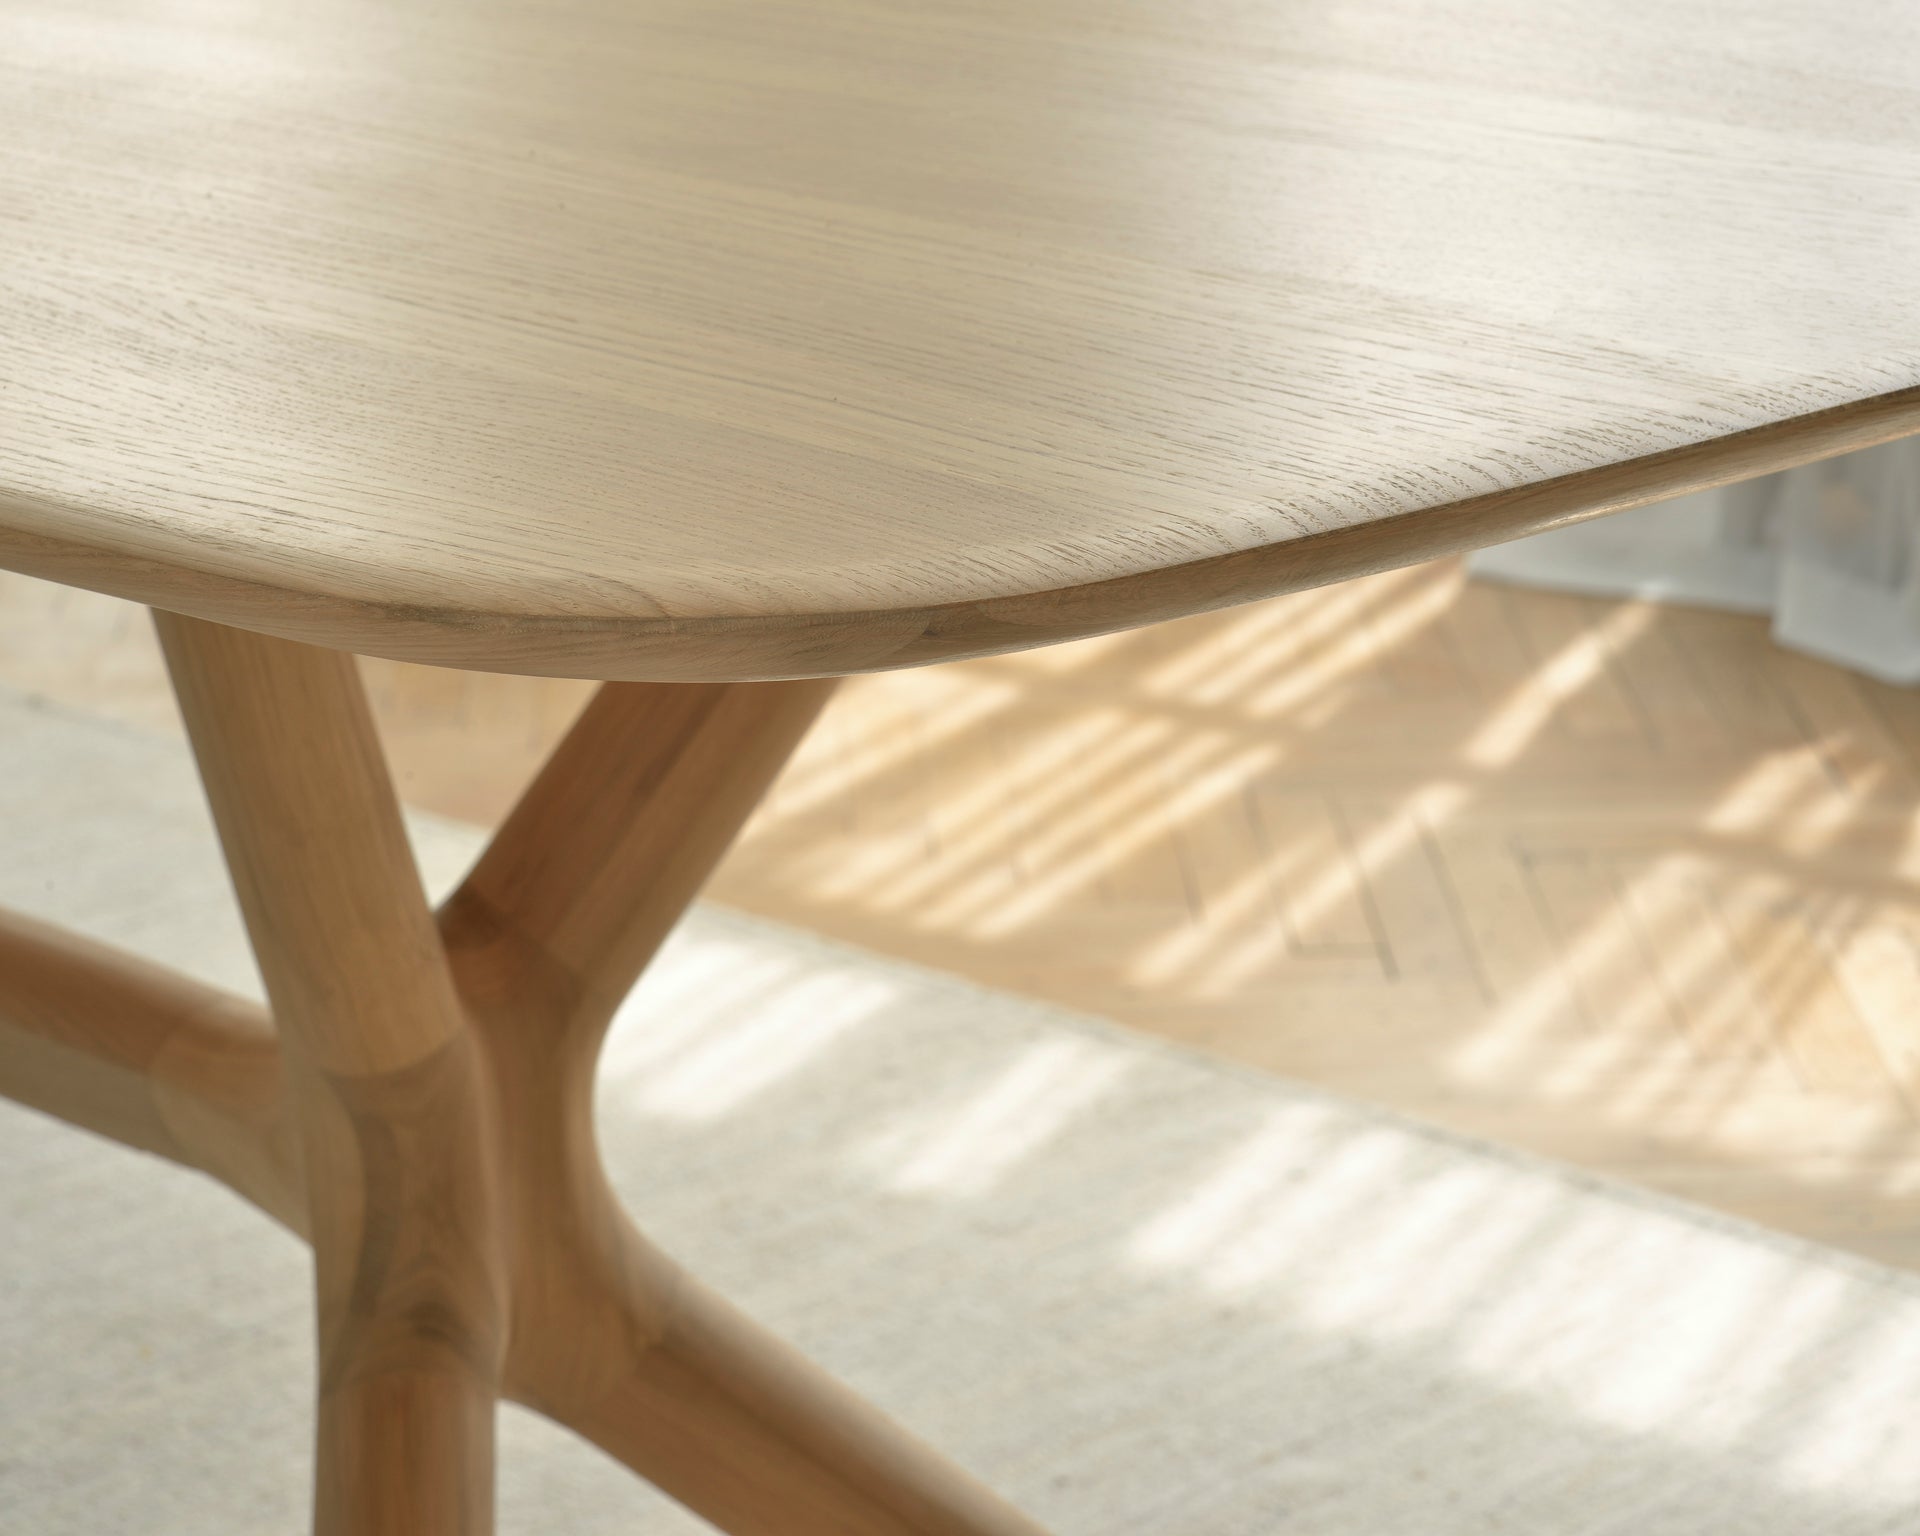 x dining table by ethnicraft on adorn.house